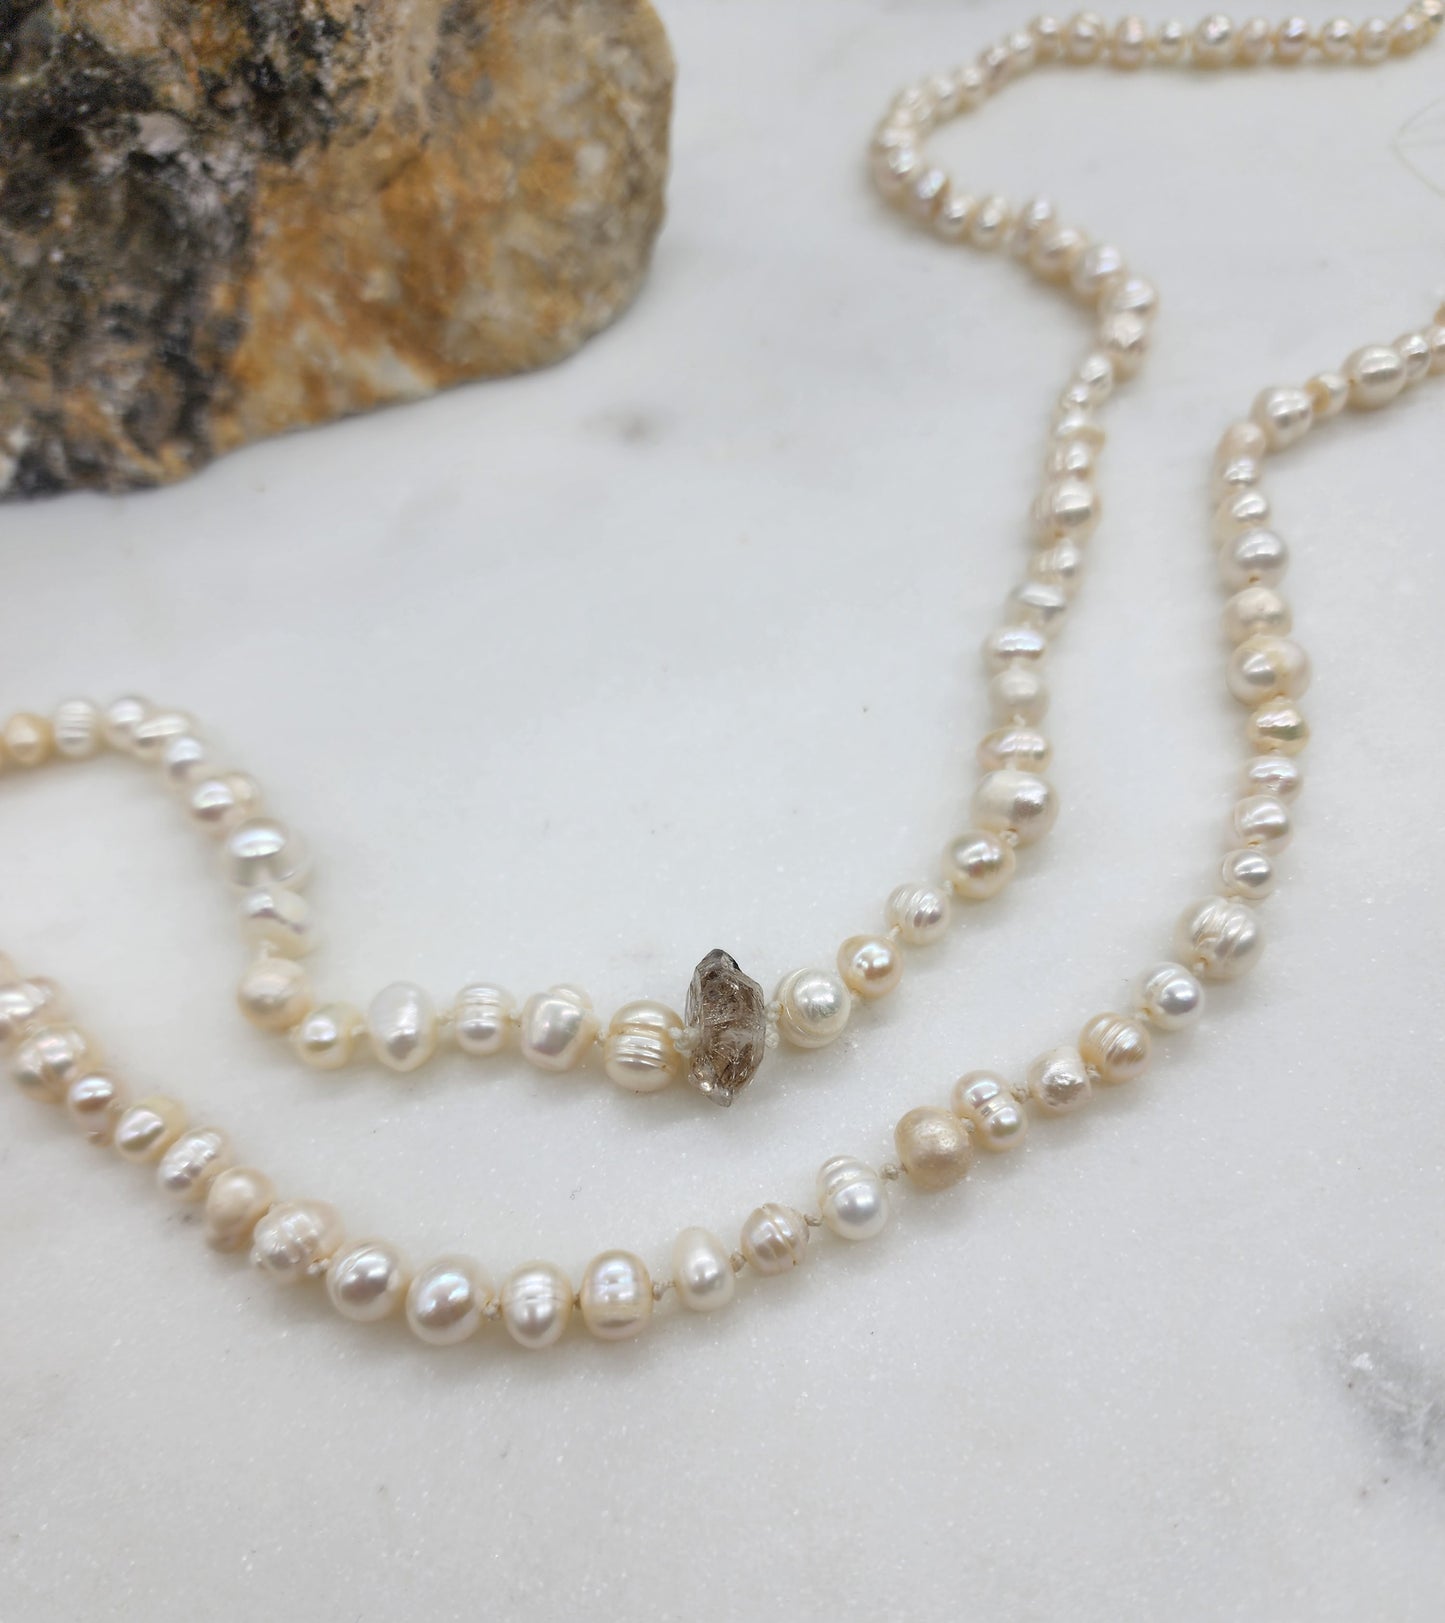 HandTied Pearl Necklace with Herkmier Diamond Accent